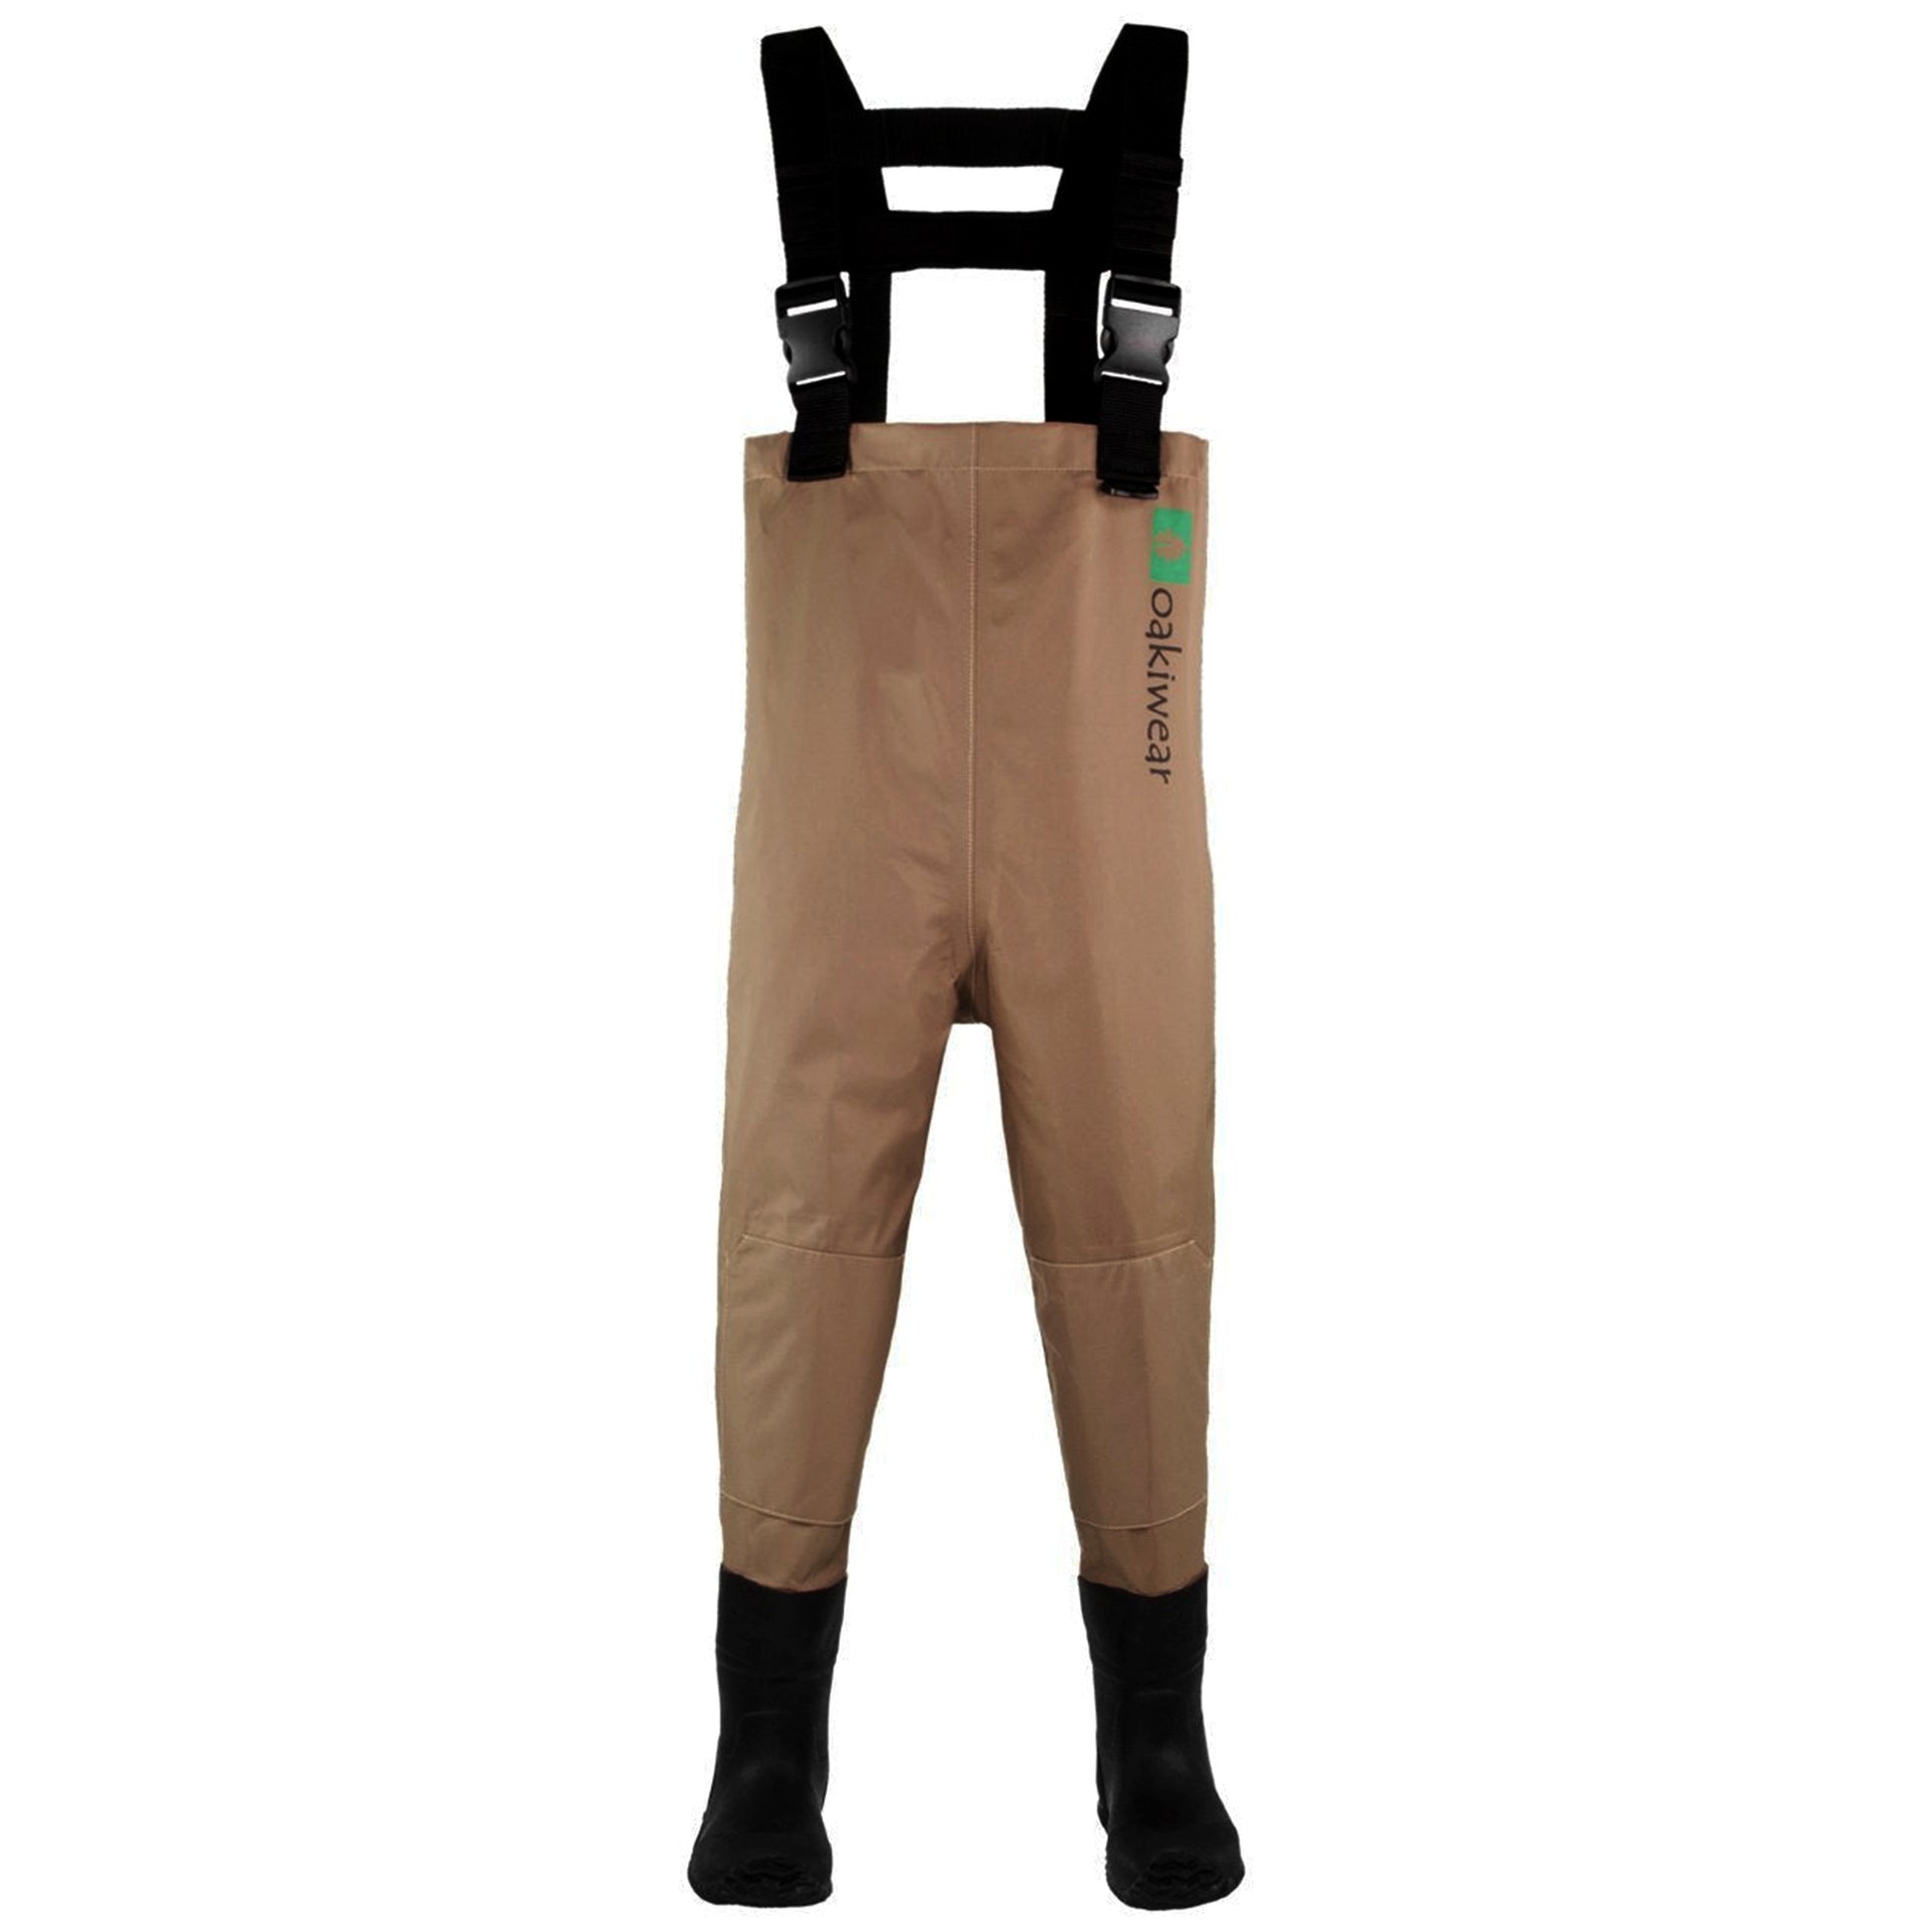 Fishing chest waders for Kids, Waterproof Children's Waders with Non-Slip  Boots, Children Playing Water Clothes, Suitable for Playing with Water